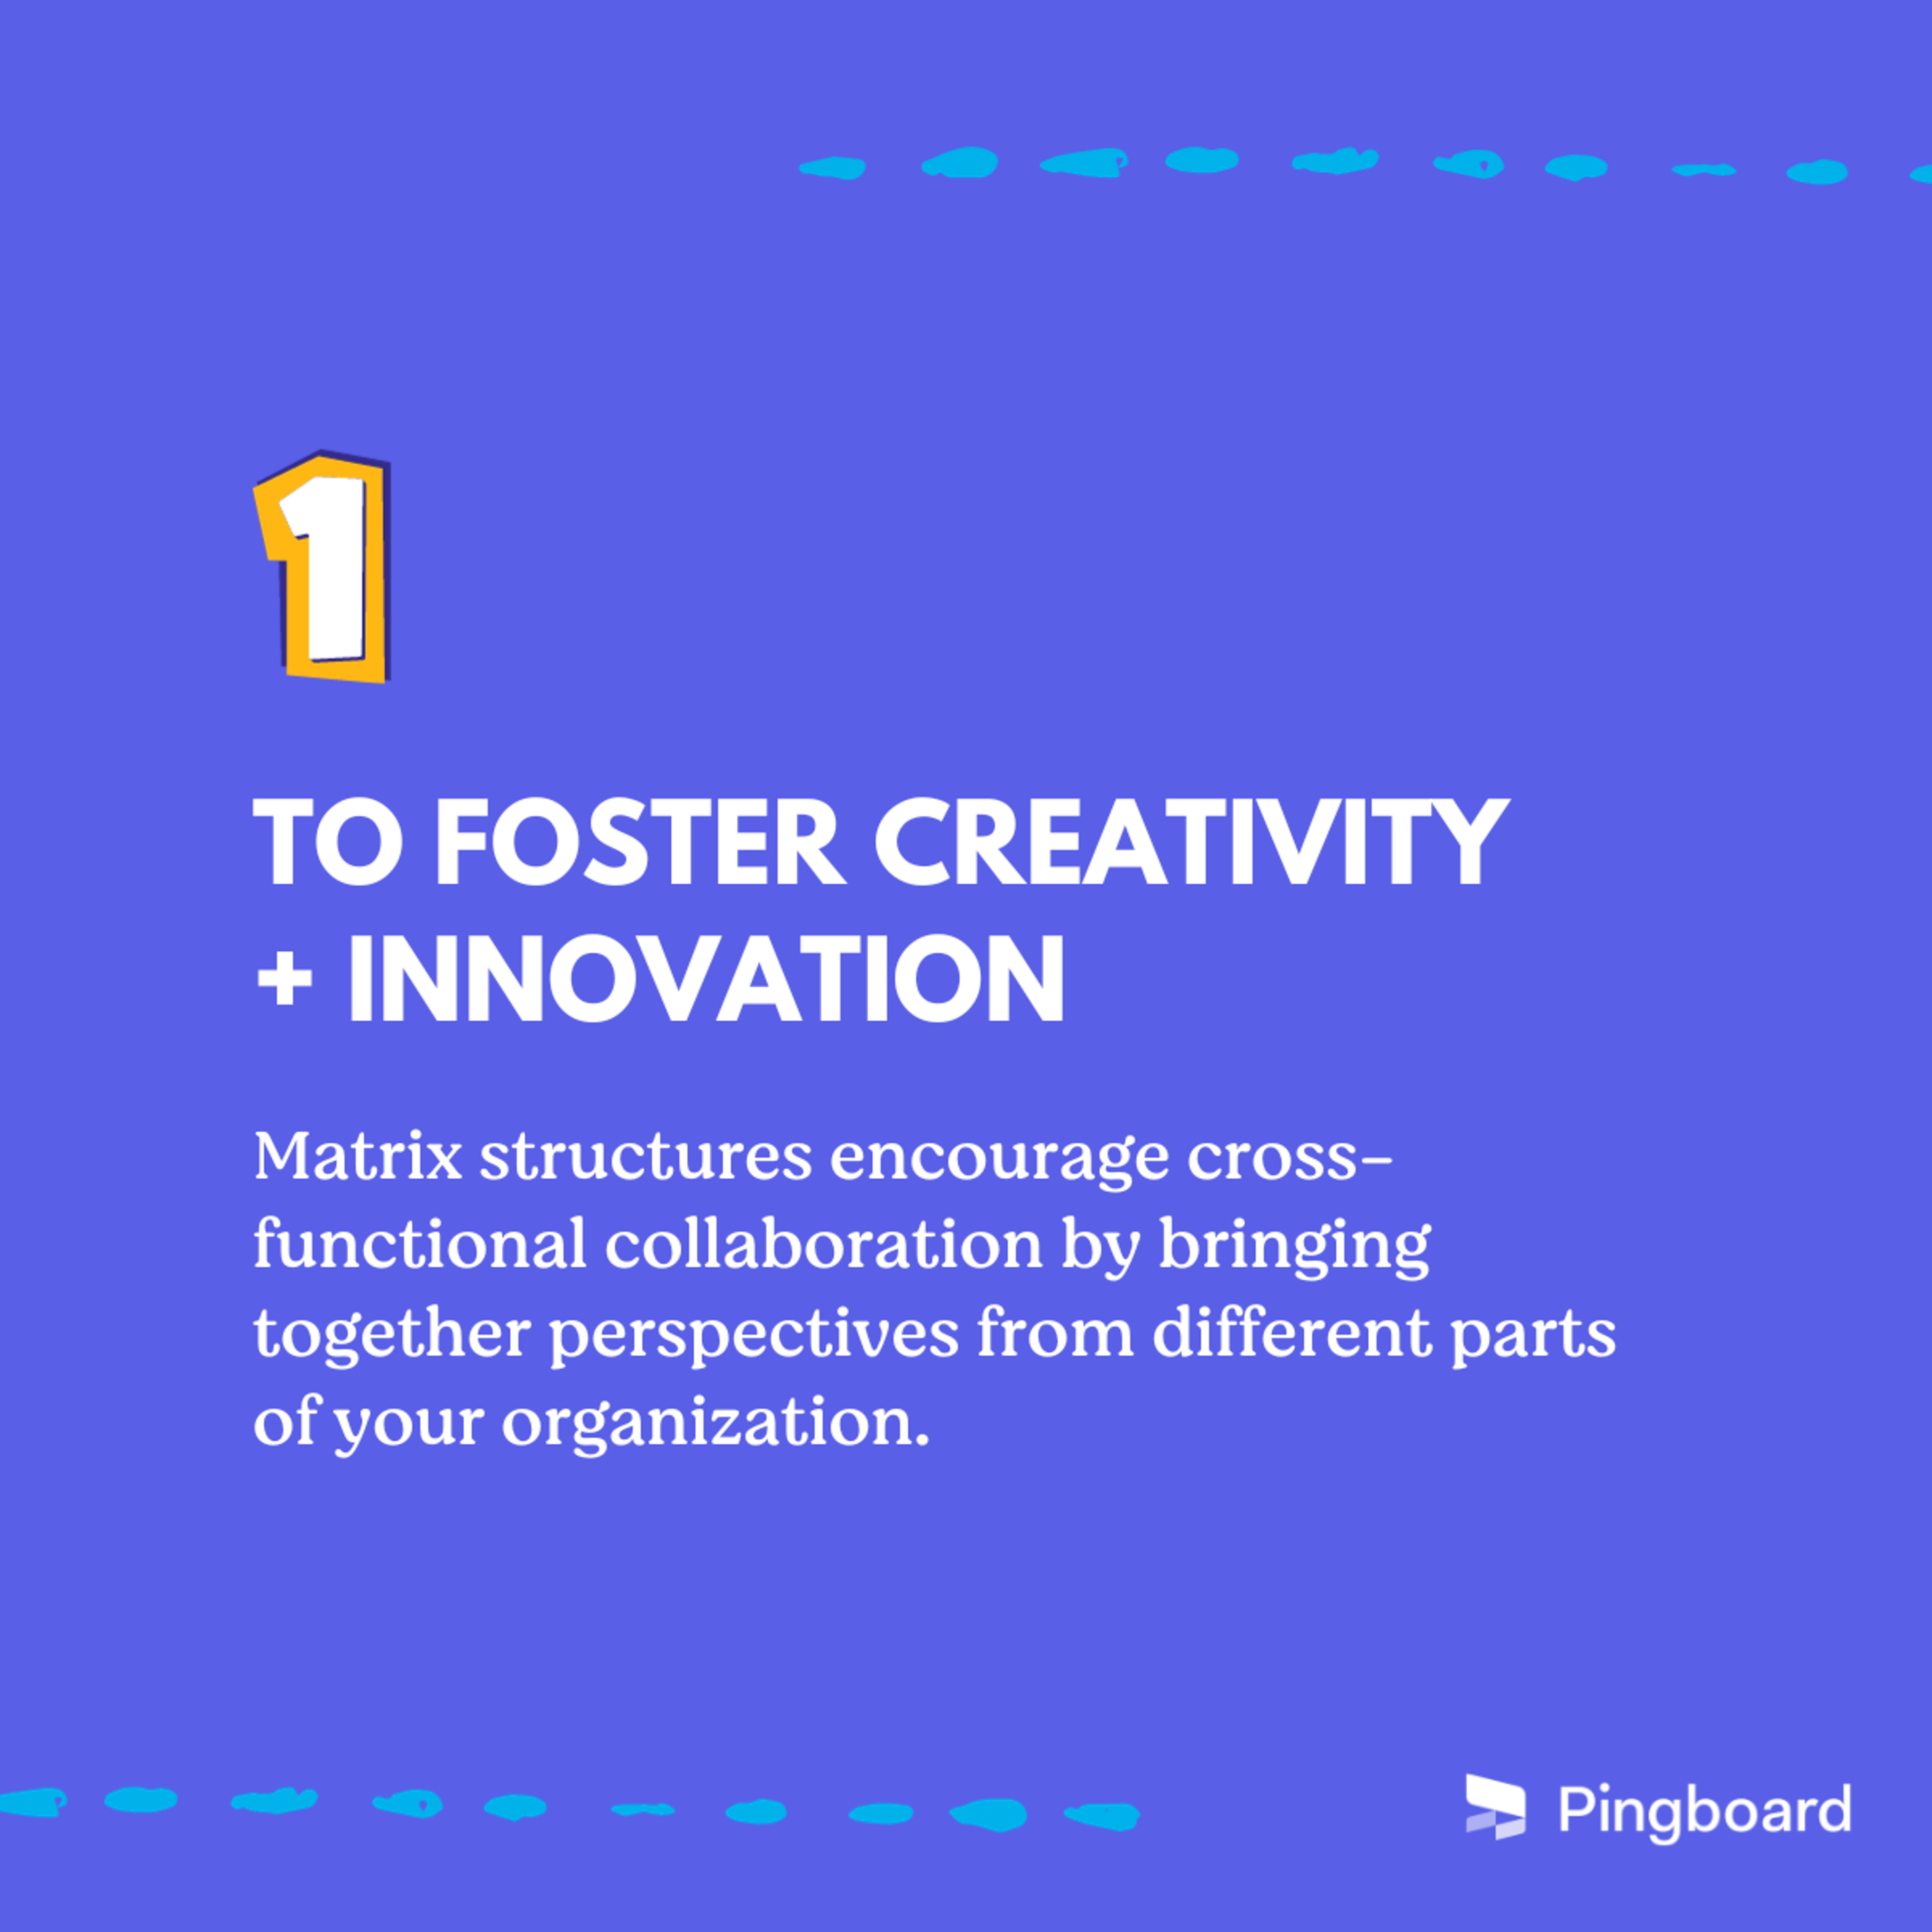 Foster creativity and innovation